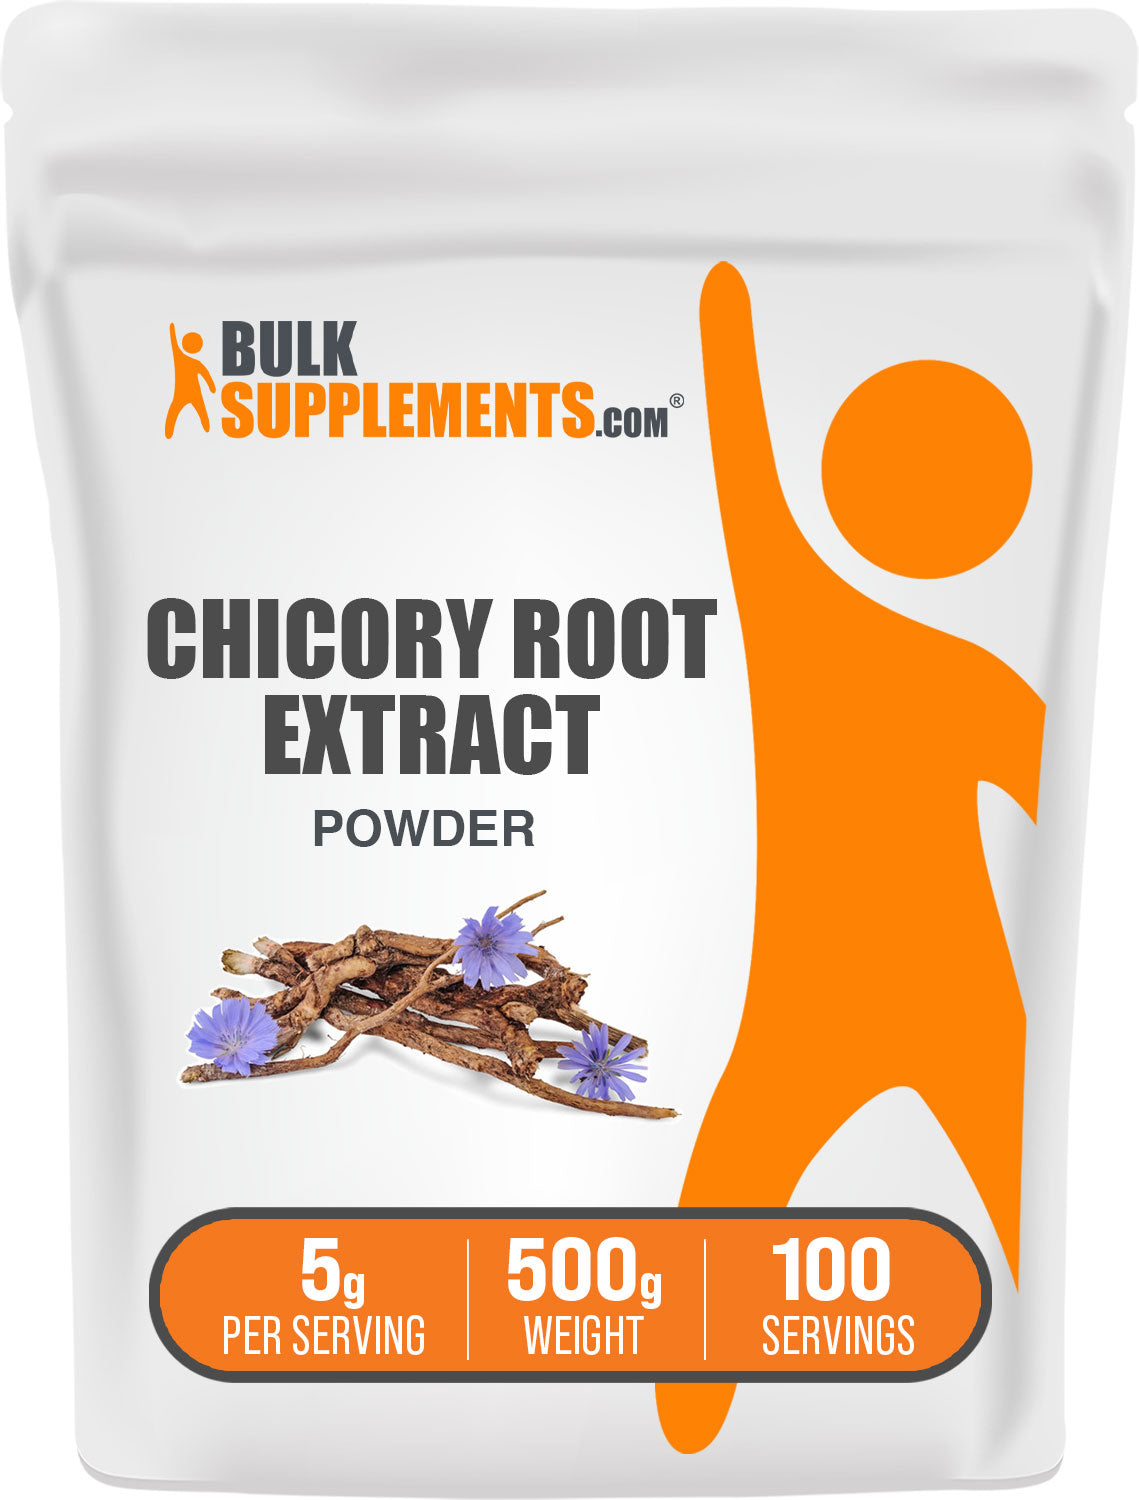 BulkSupplements.com Chicory Root Extract Powder 500g Bag